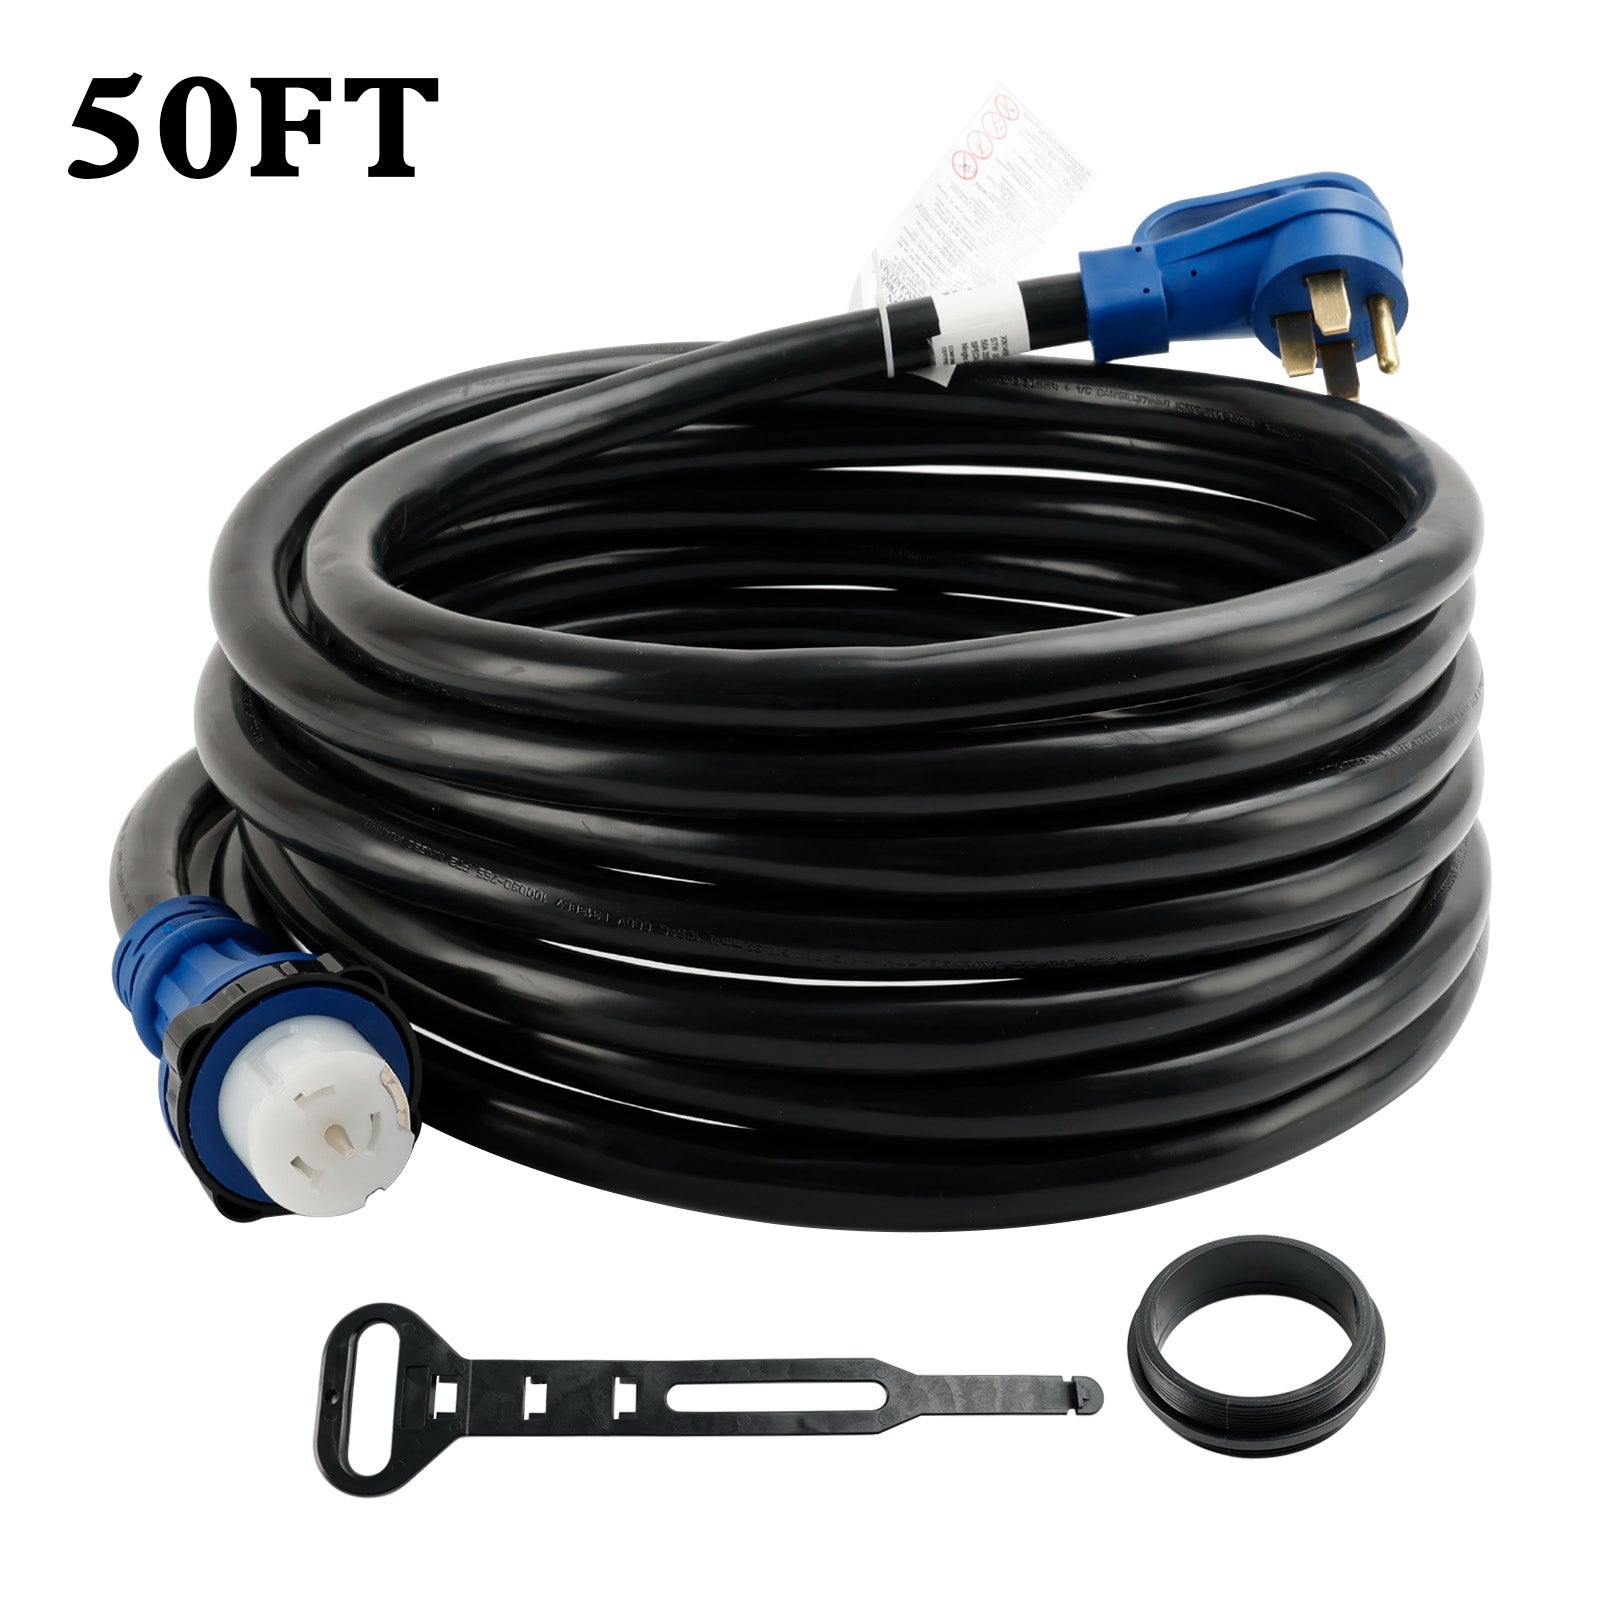 UL Listed 50 Amp 50 Ft RV/Generator Cord With Locking Connector For RV Camper